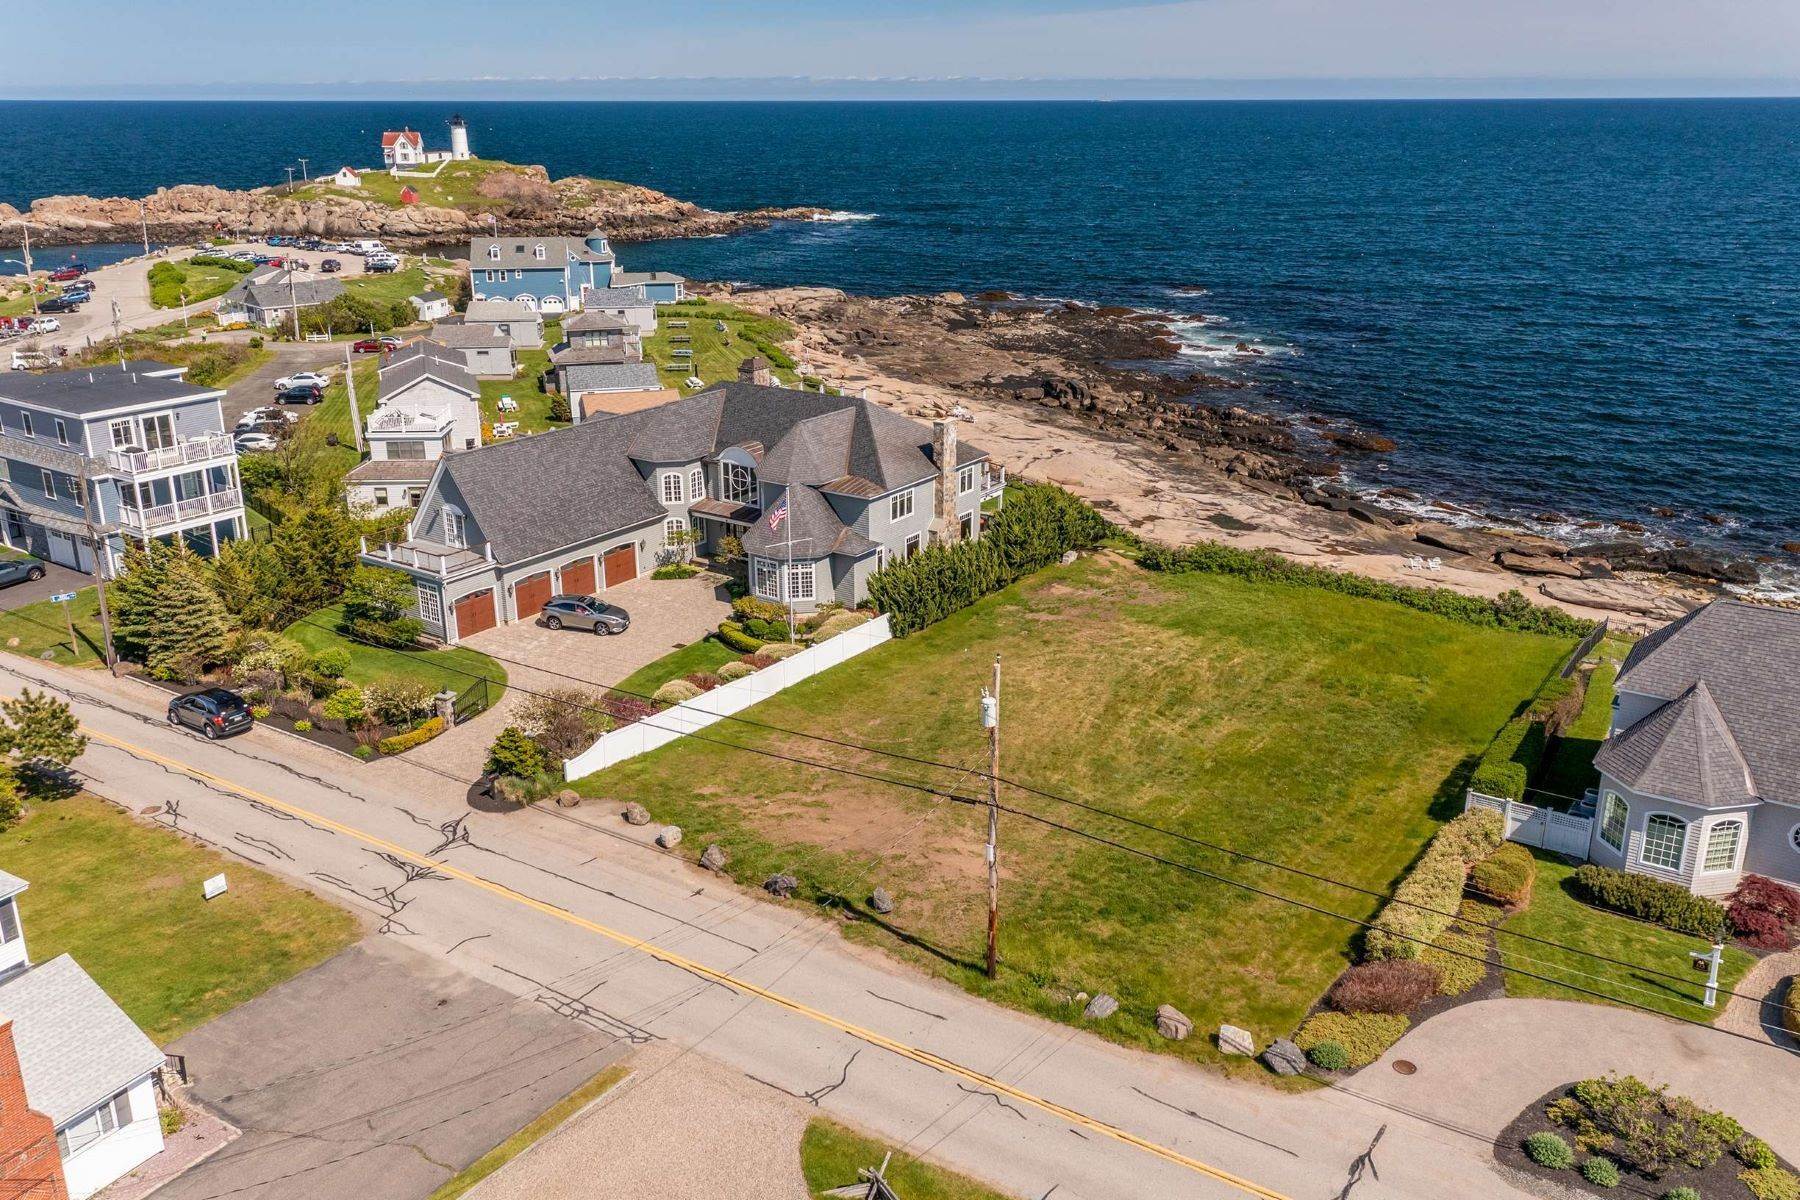 Property for Sale at Unobstructed Ocean Views - Level Building Lot on Nubble Peninsula 175 Nubble Road, York, ME 03909